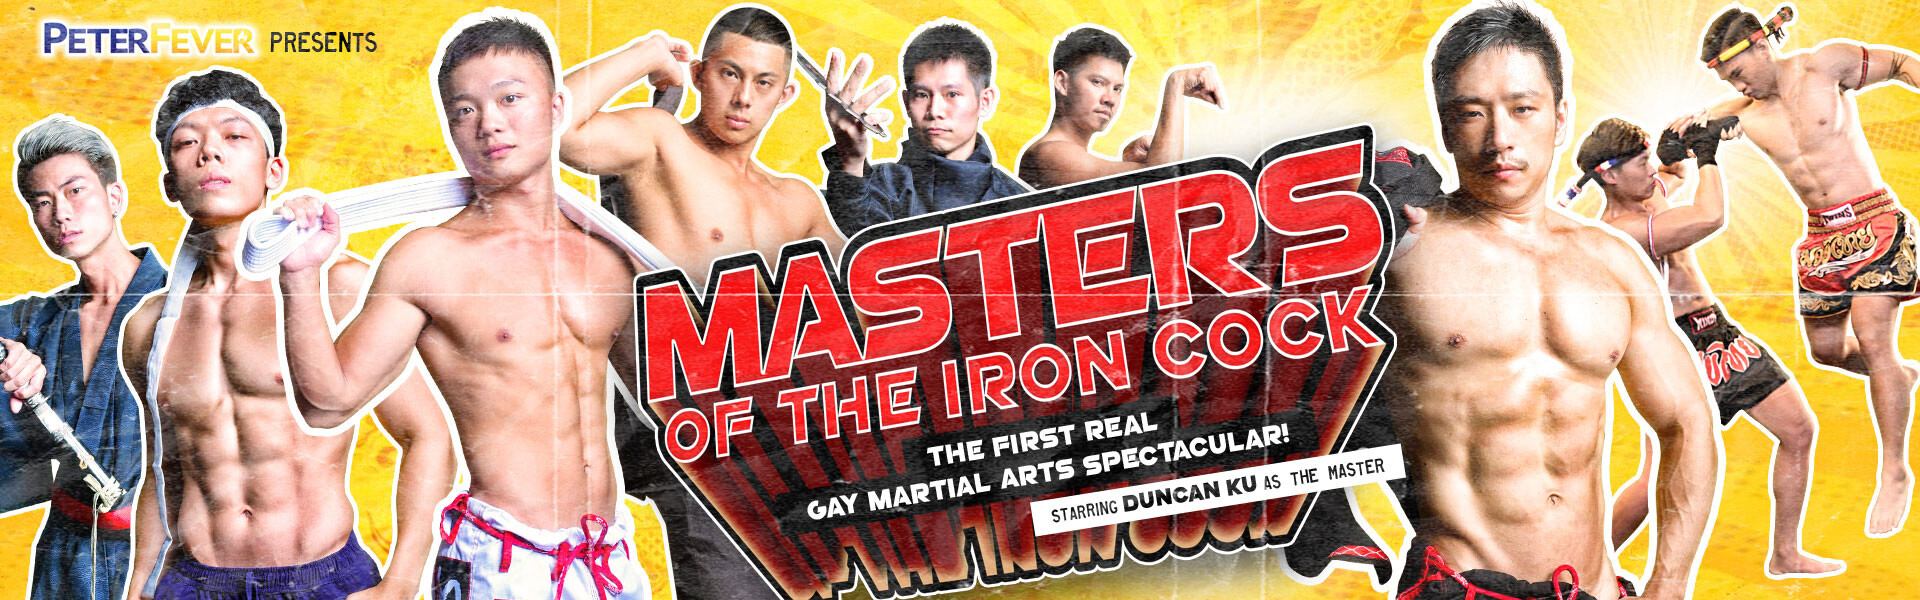 Masters Of the Iron Cock